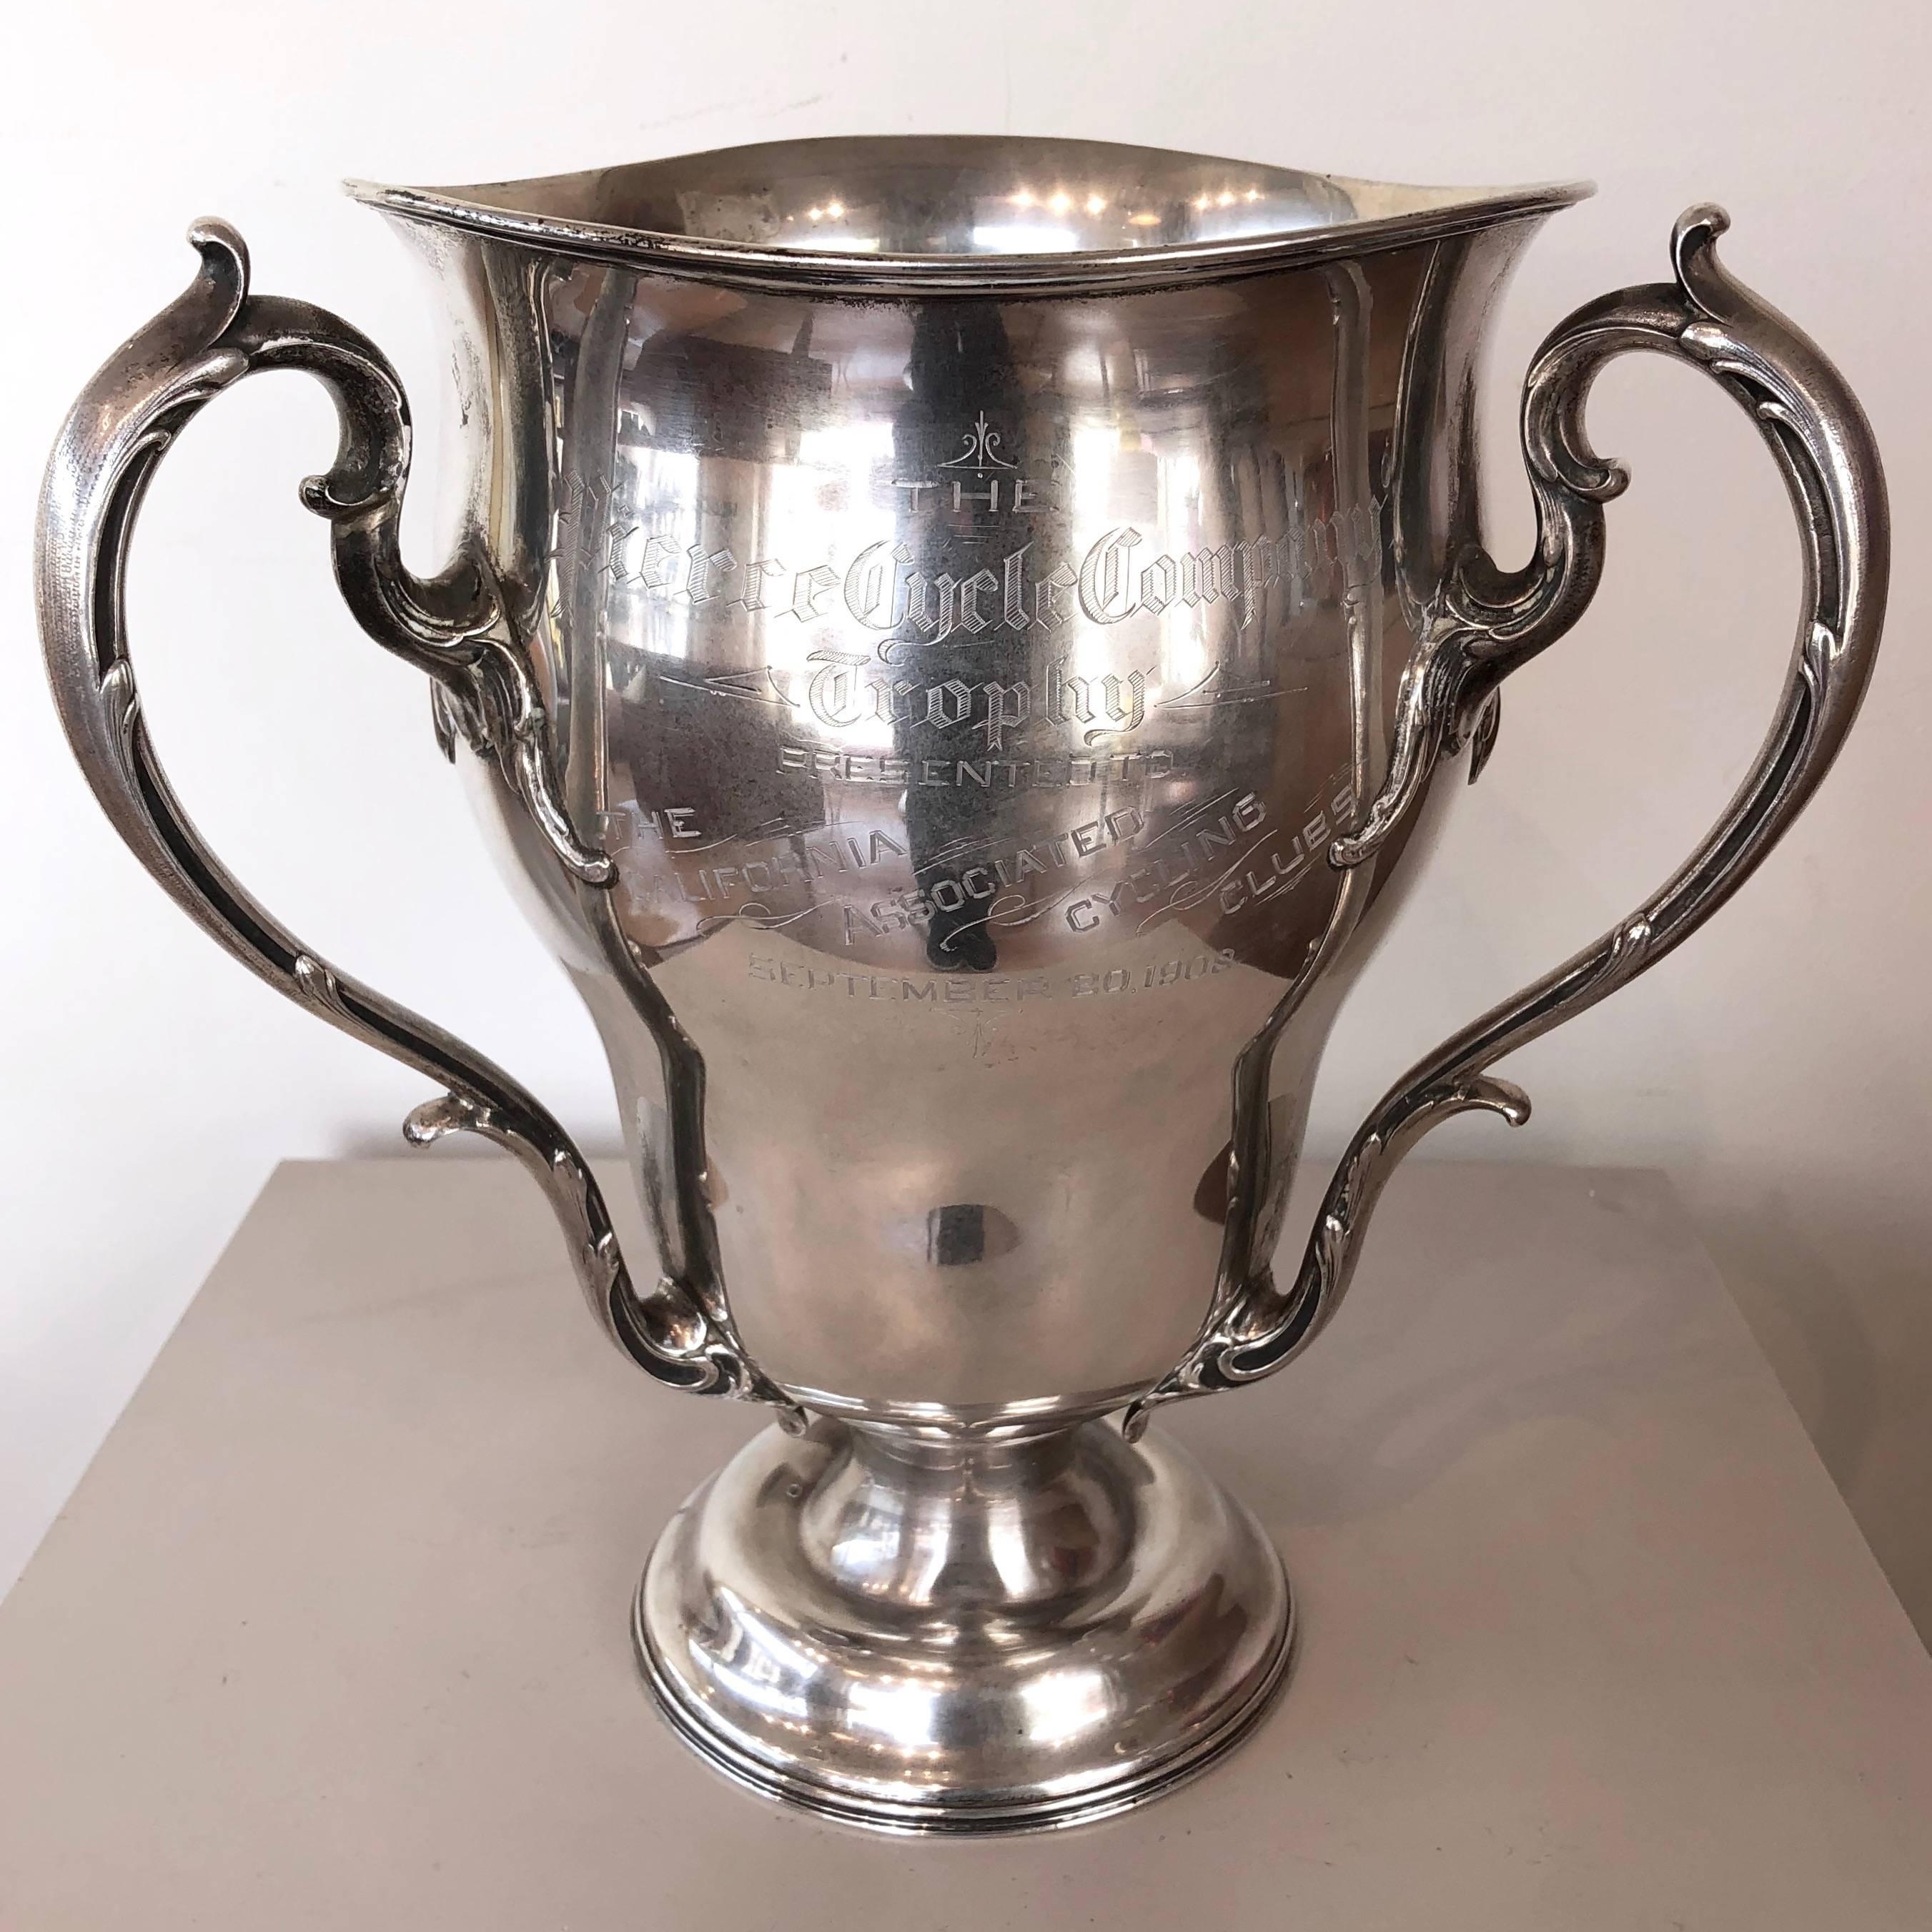 An impressively sized and historically important Pierce Cycle Company 1908–1913 perpetual cycling trophy crafted in sterling silver by R. Wallace & Sons.

Three-handled loving cup awarded on a yearly basis to cycling clubs hailing from San